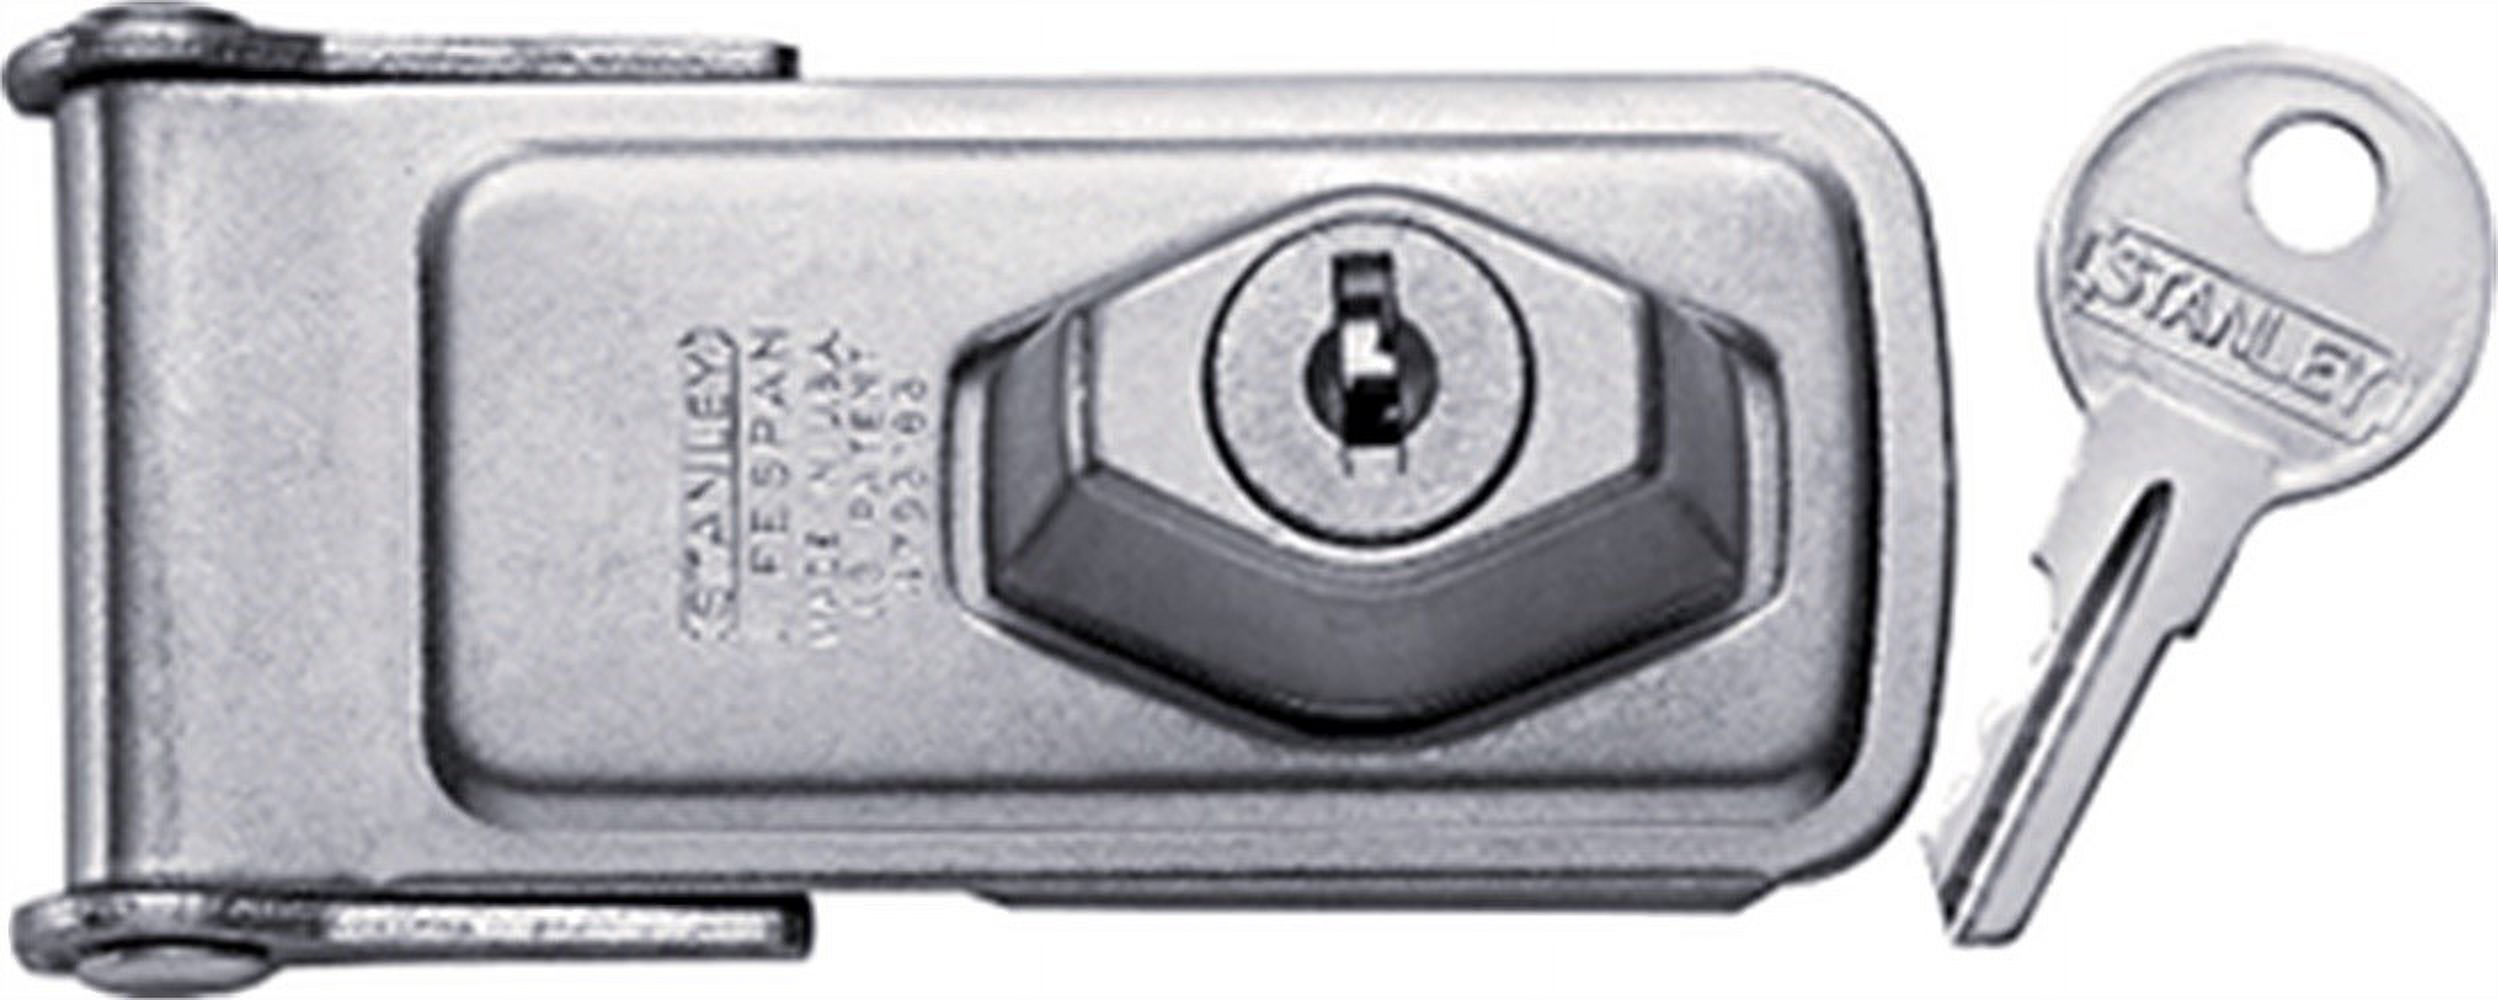 Hasp Safety Kyd 3.5x1.5in Znc - image 1 of 1